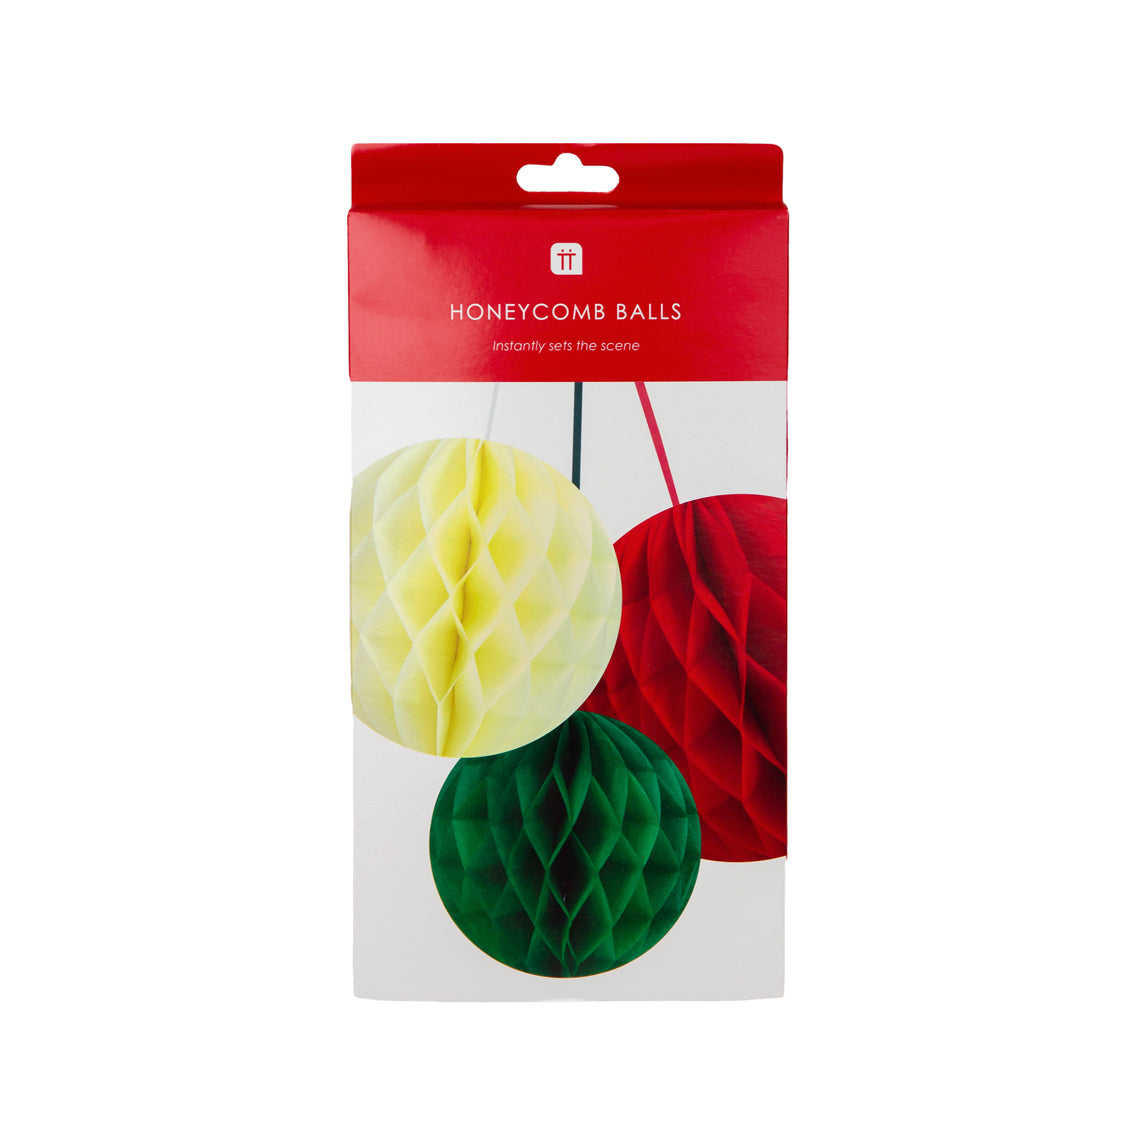 An image of retail packaging for 3 festive coloured honeycomb decoration paper balls.